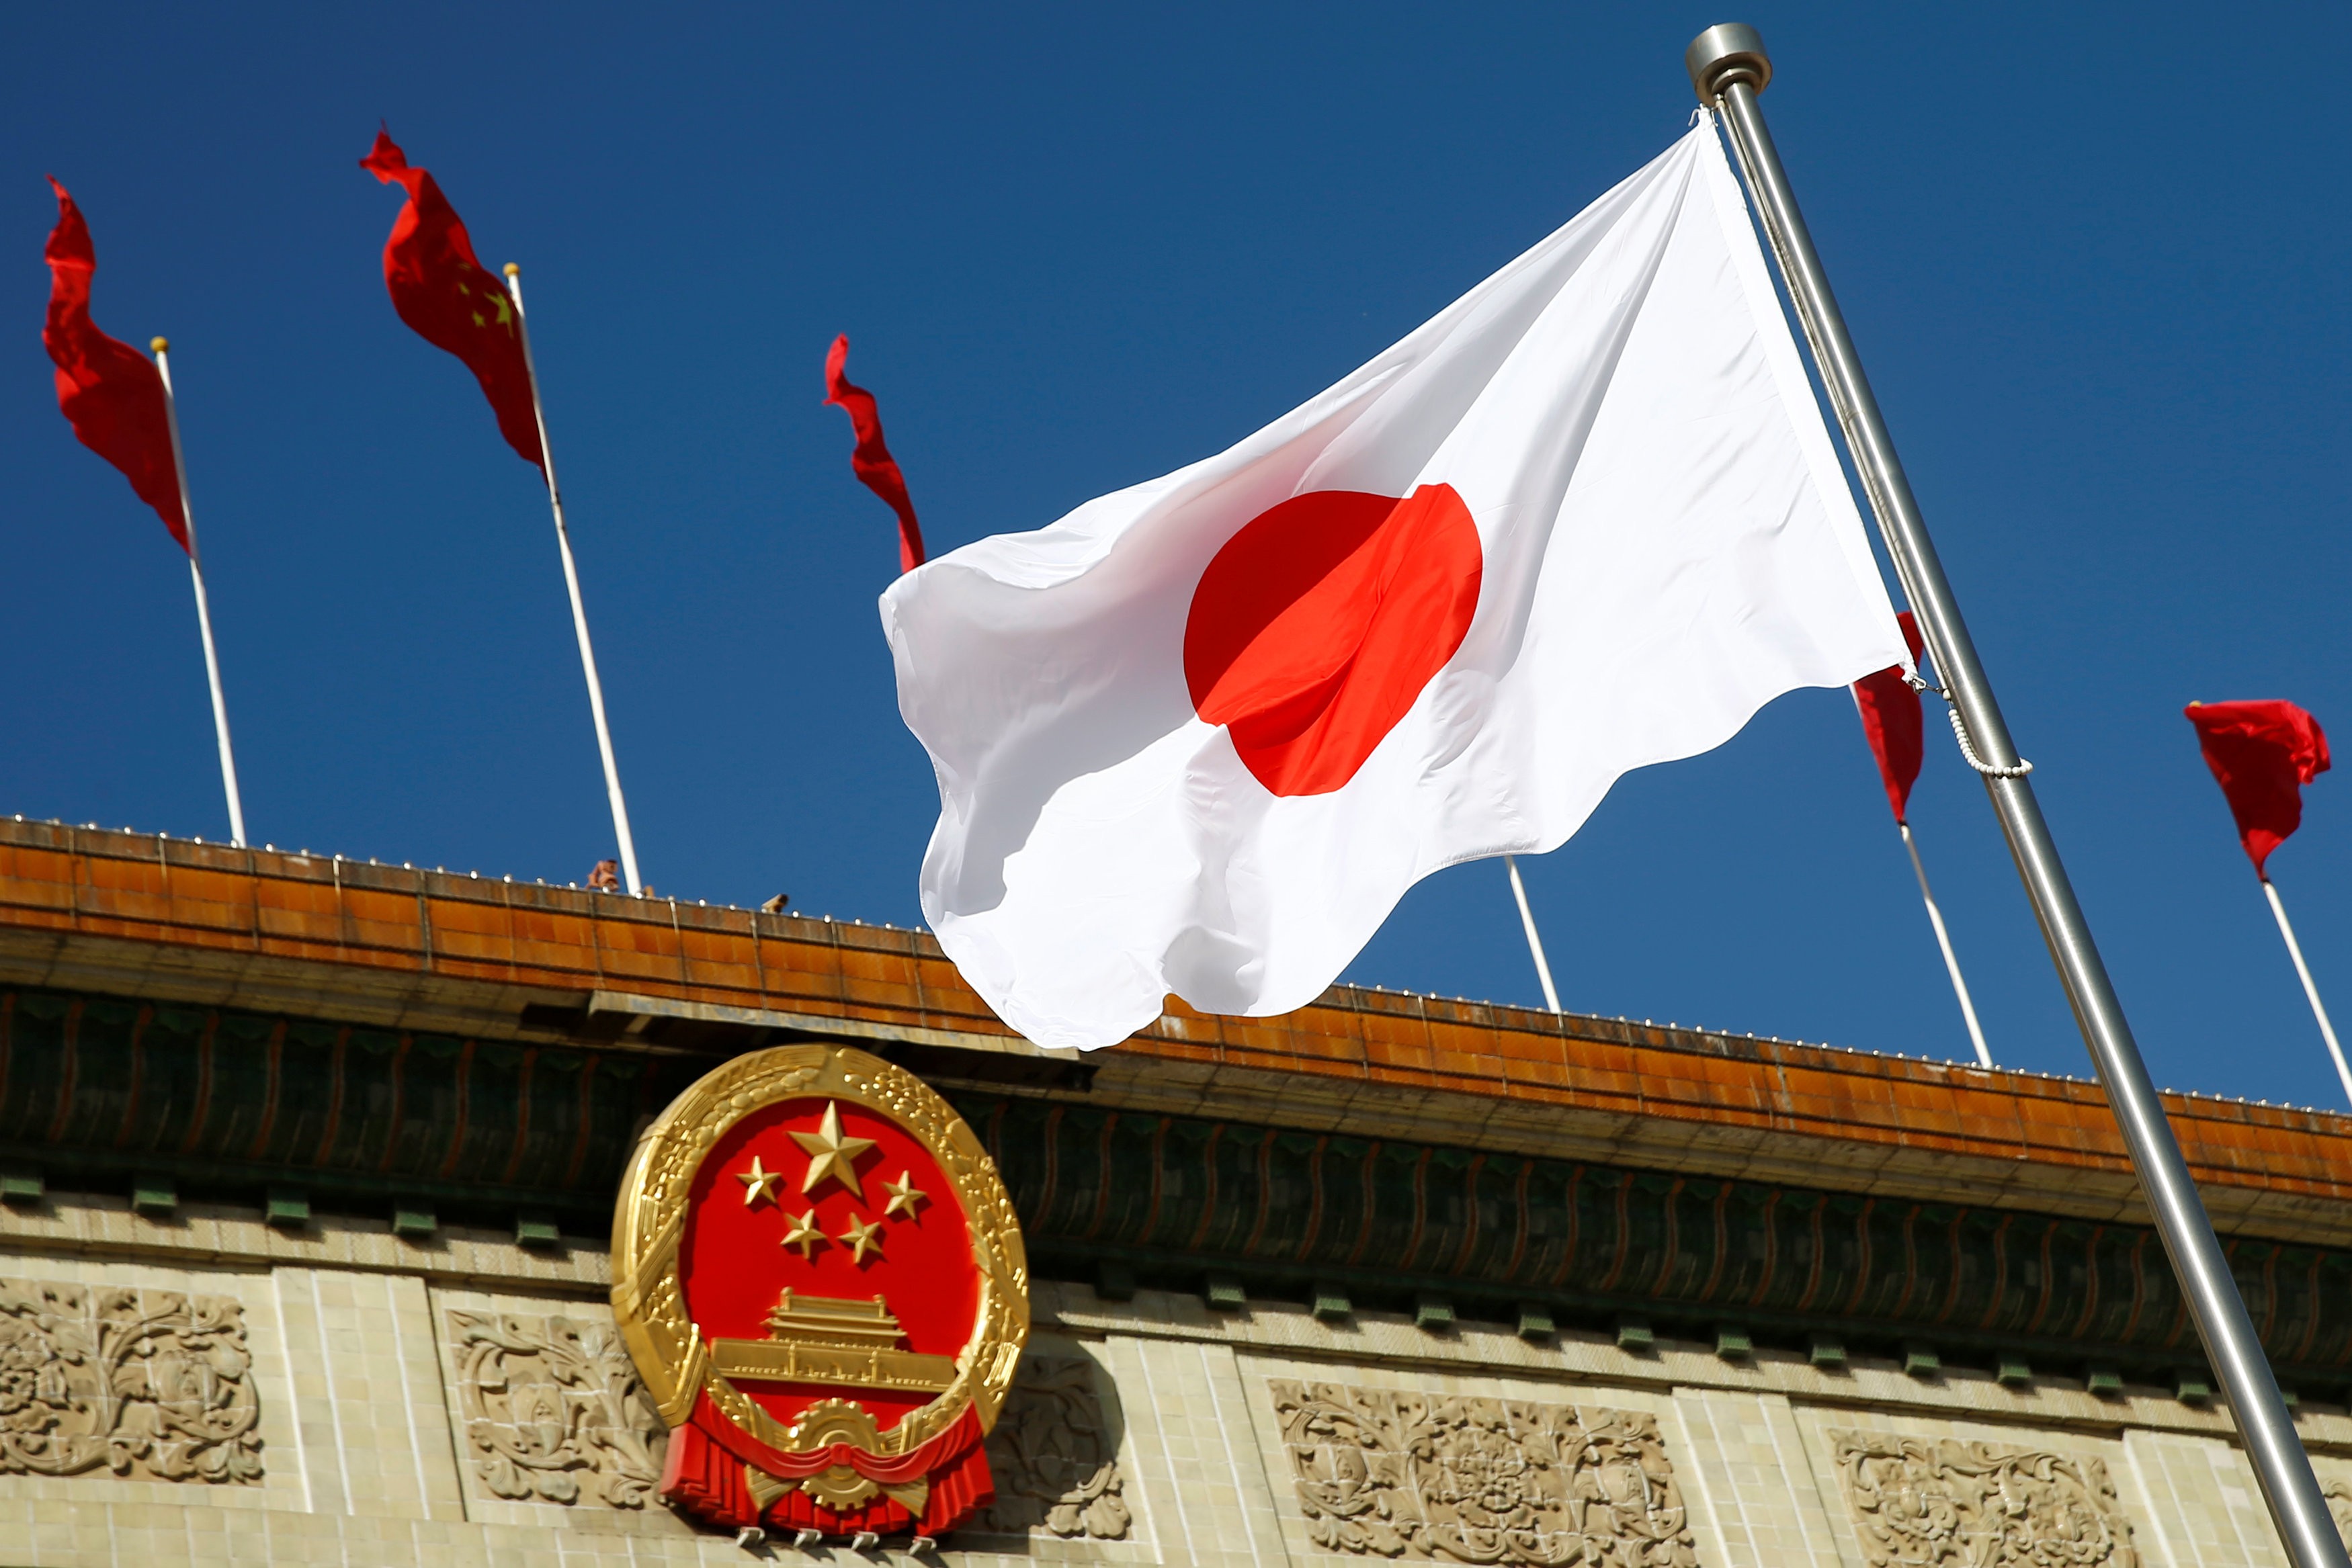 Japan's flag flutters outside the Great Hall of the People in Beijing. Photo: Reuters